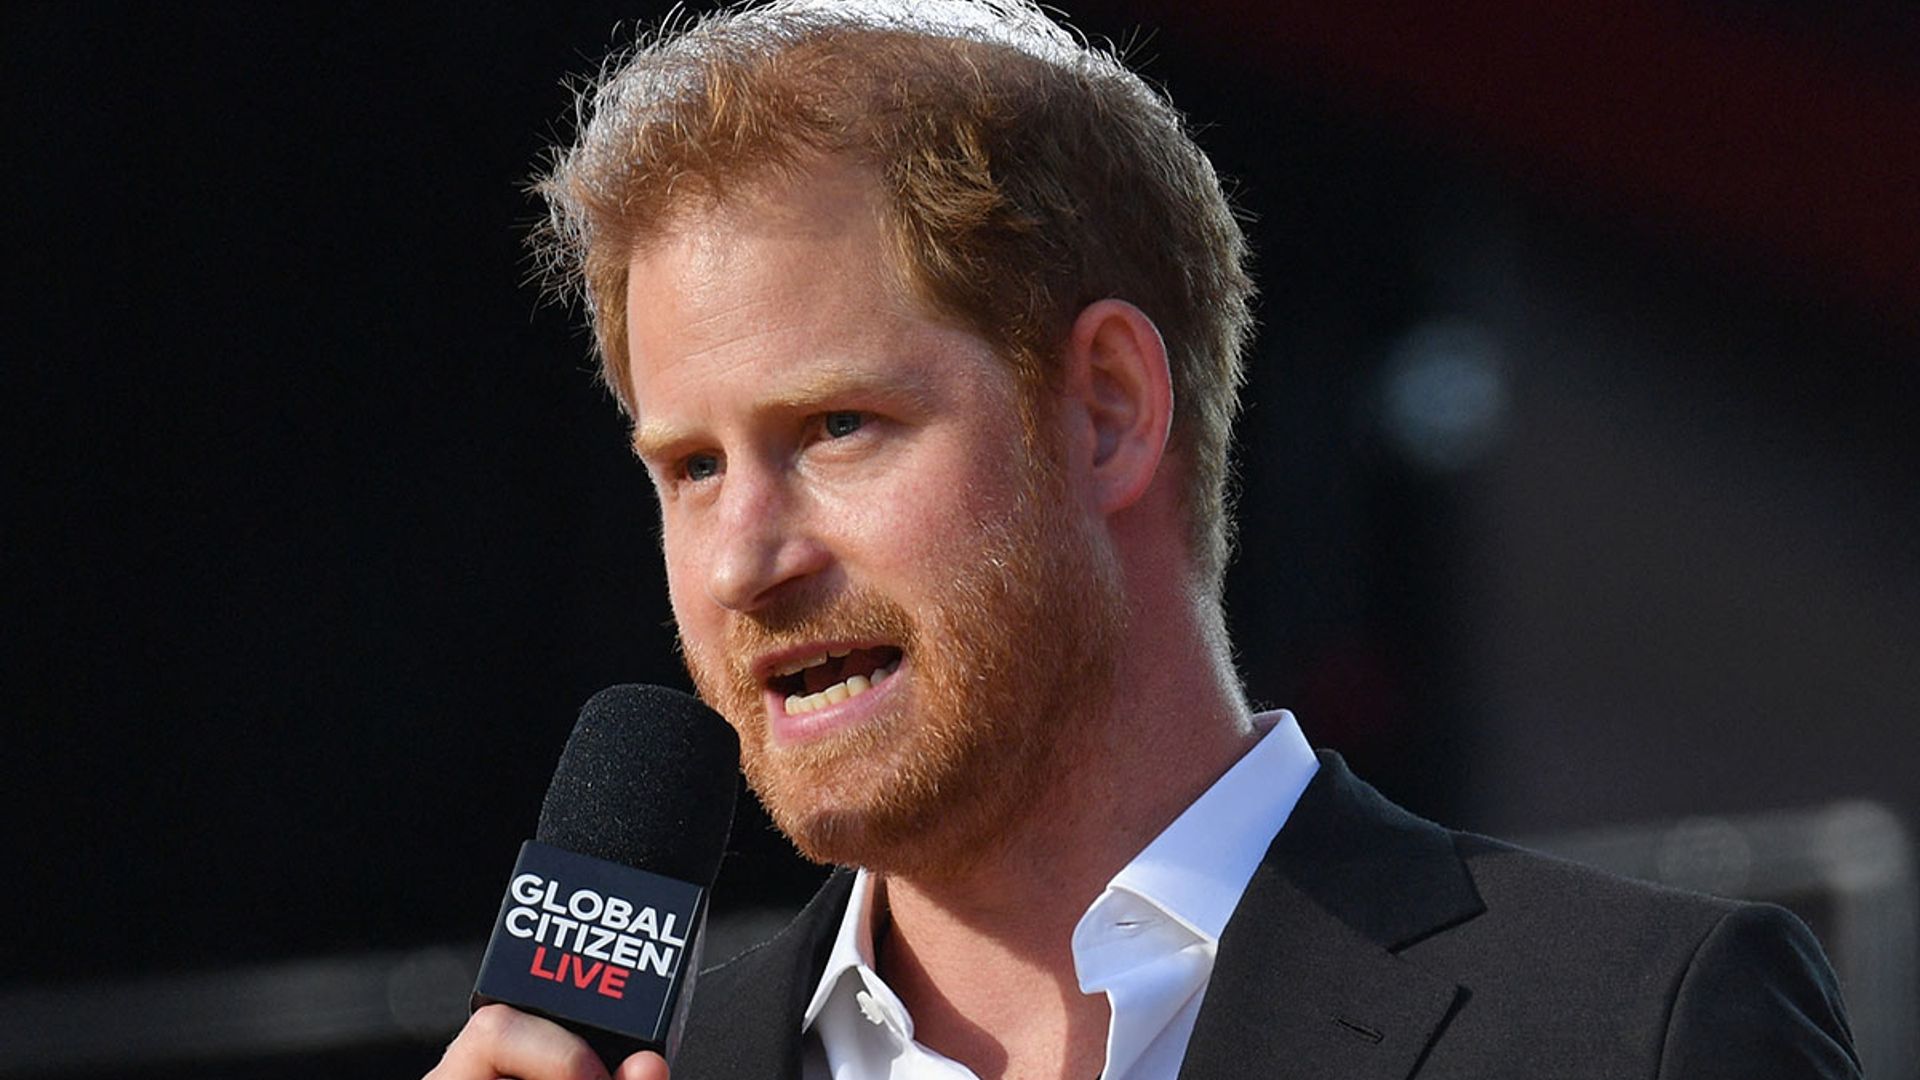 Prince Harry narrates powerful new film and it includes moving footage of Princess Diana